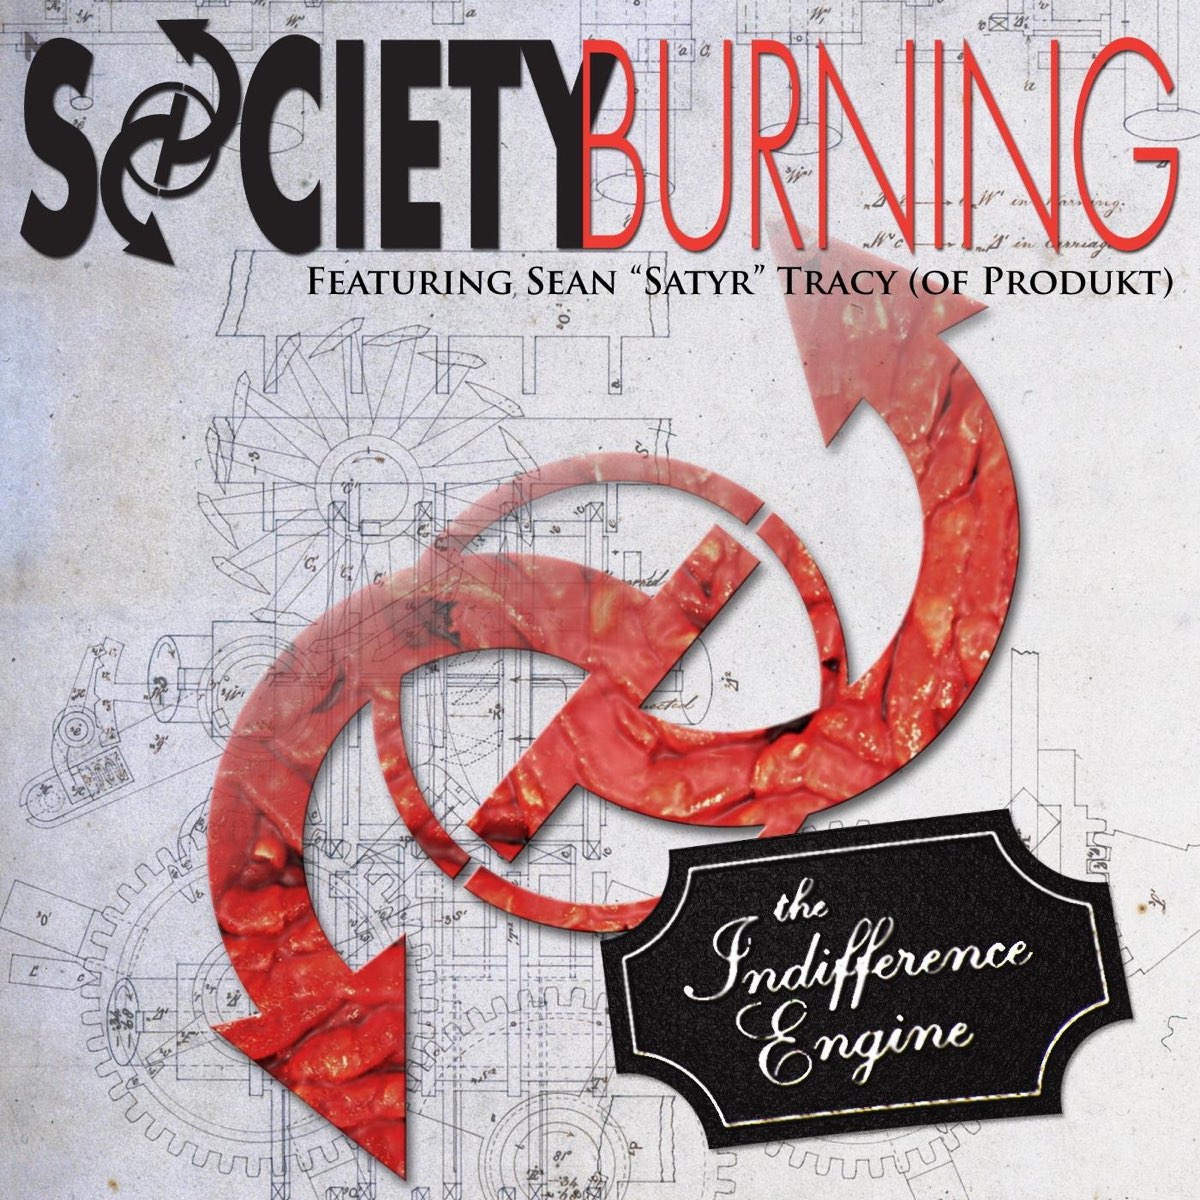 The Indifference Engine Feat Sean Tracy Single By Society Burning On Apple Music